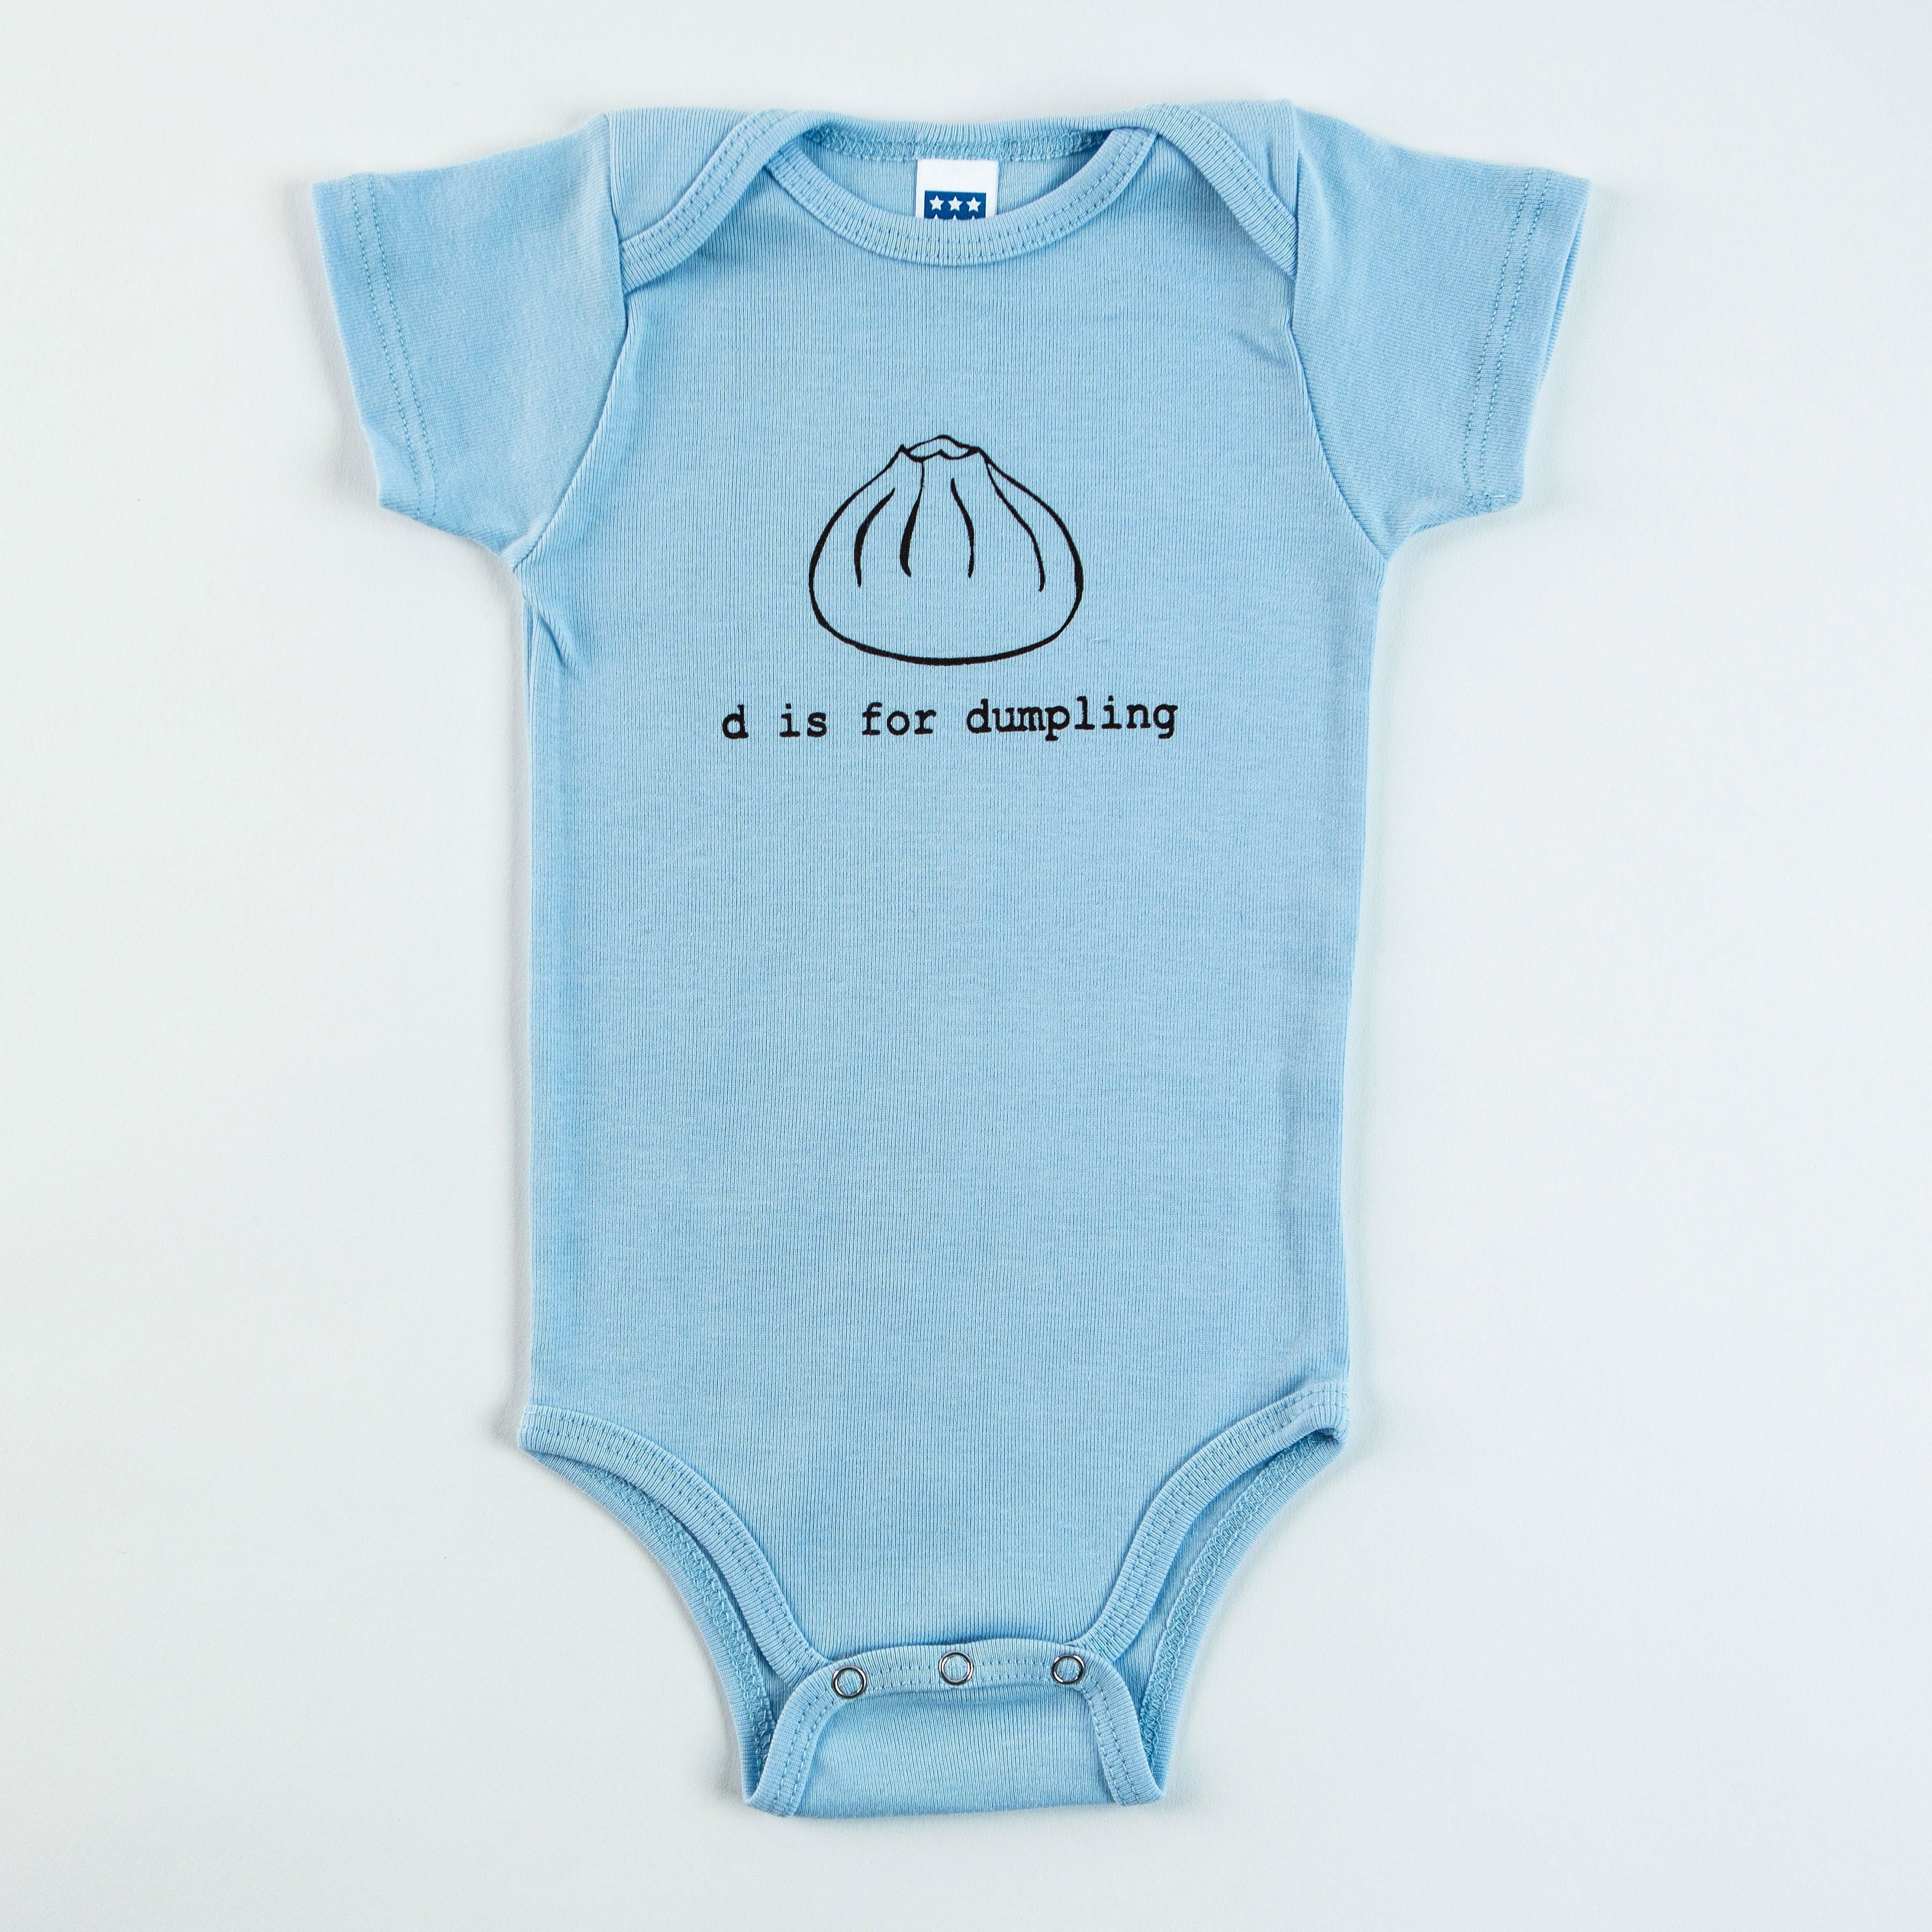 P is for Pierogi Baby One Piece Bodysuit red or Charcoal Gray Poland, Polish,  Pittsburgh 